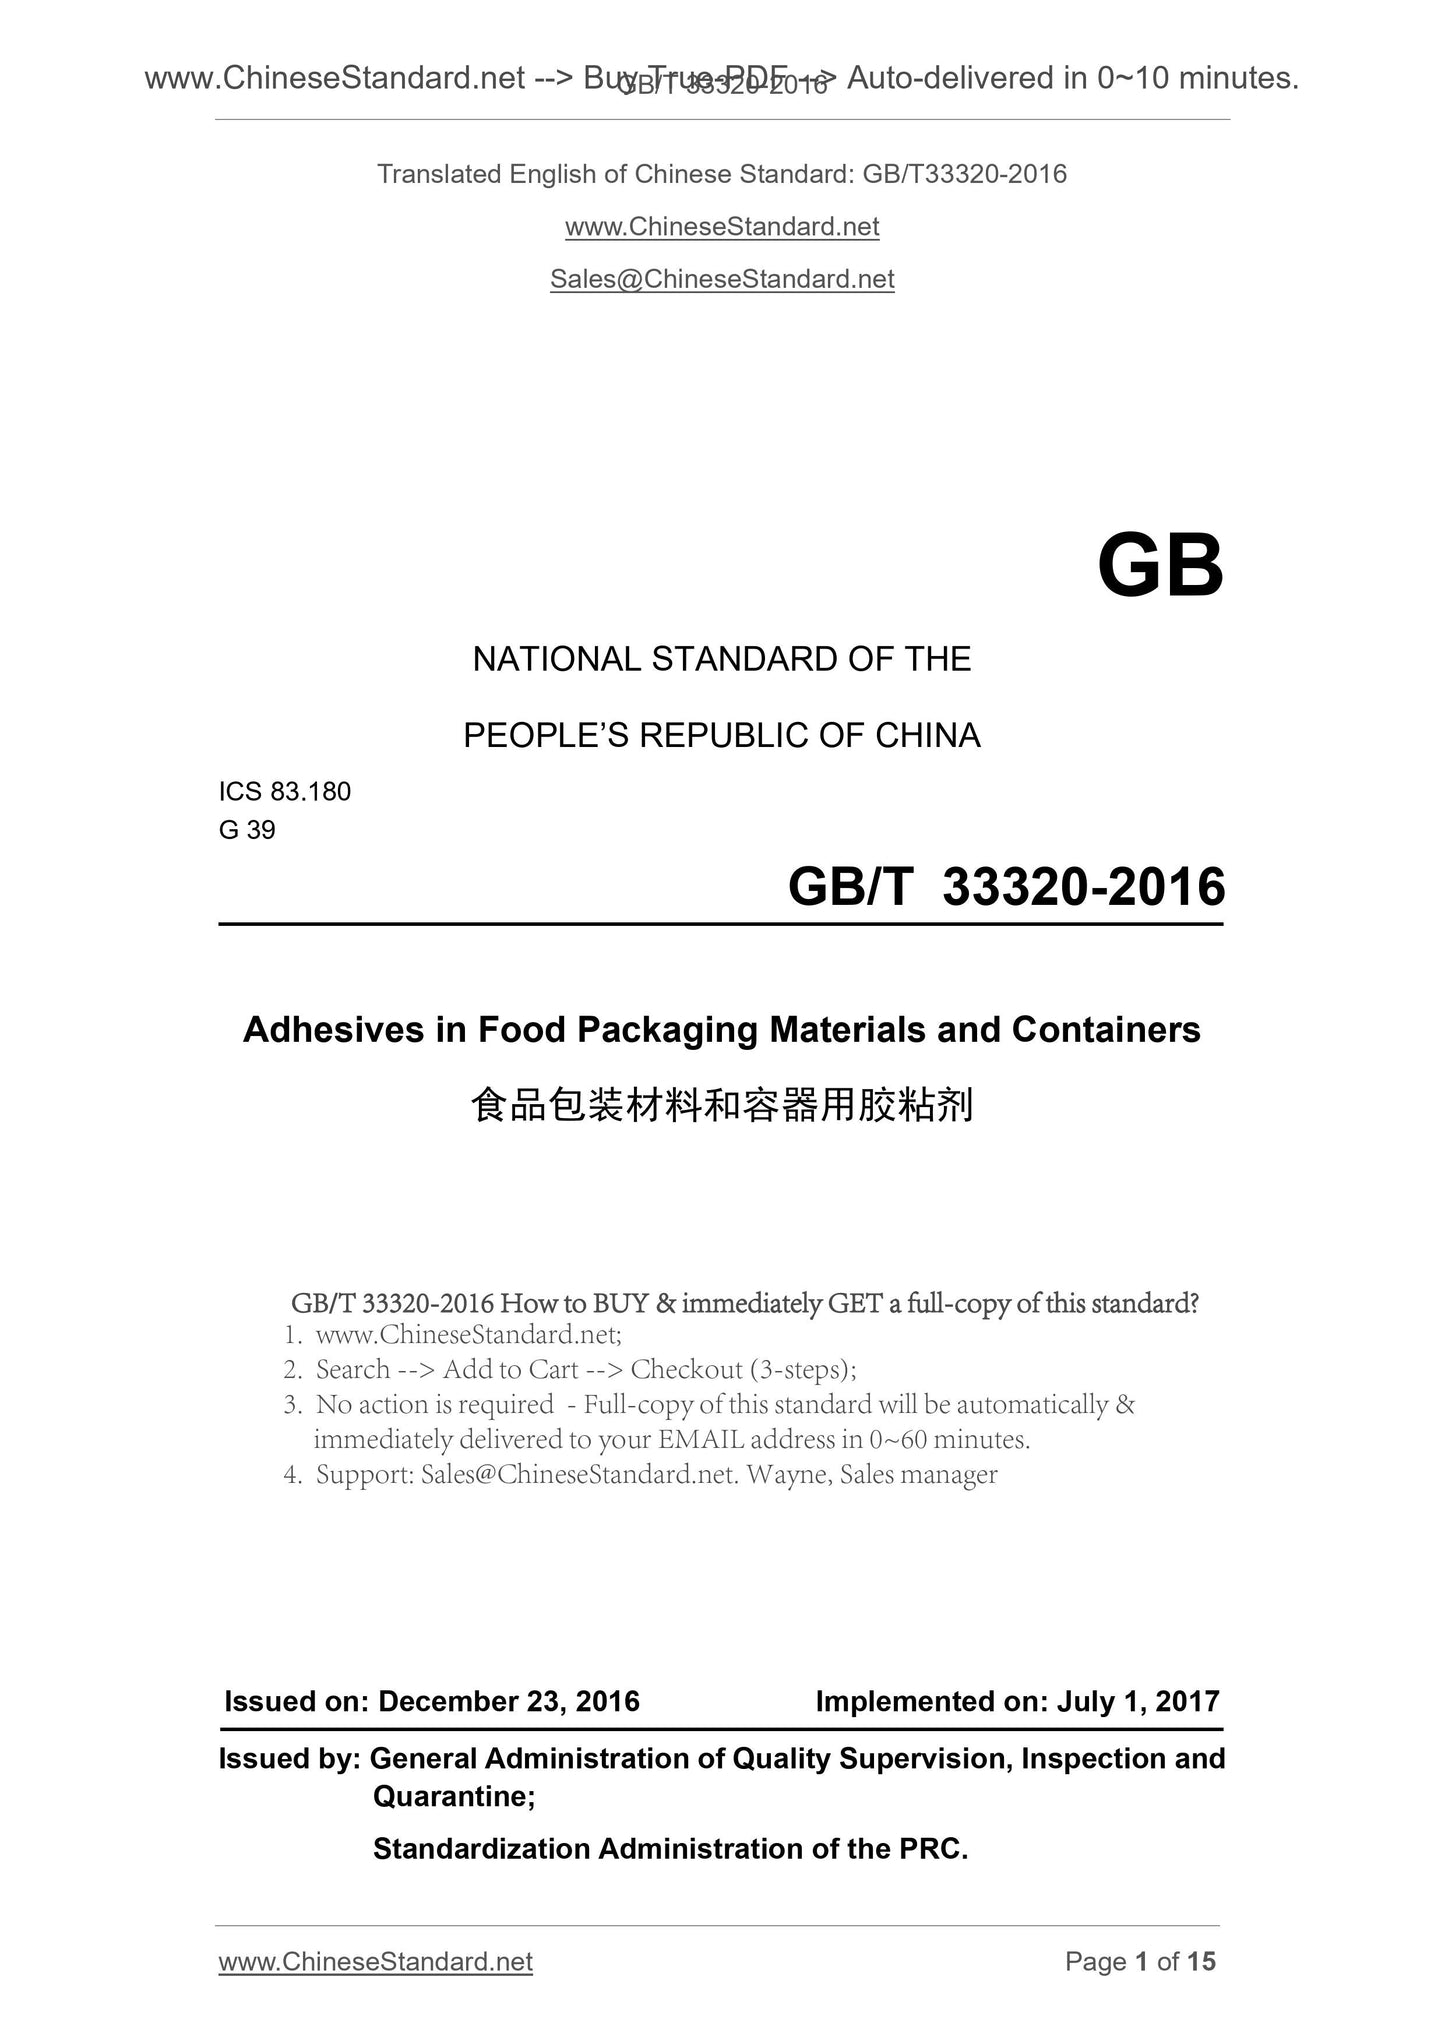 GB/T 33320-2016 Page 1